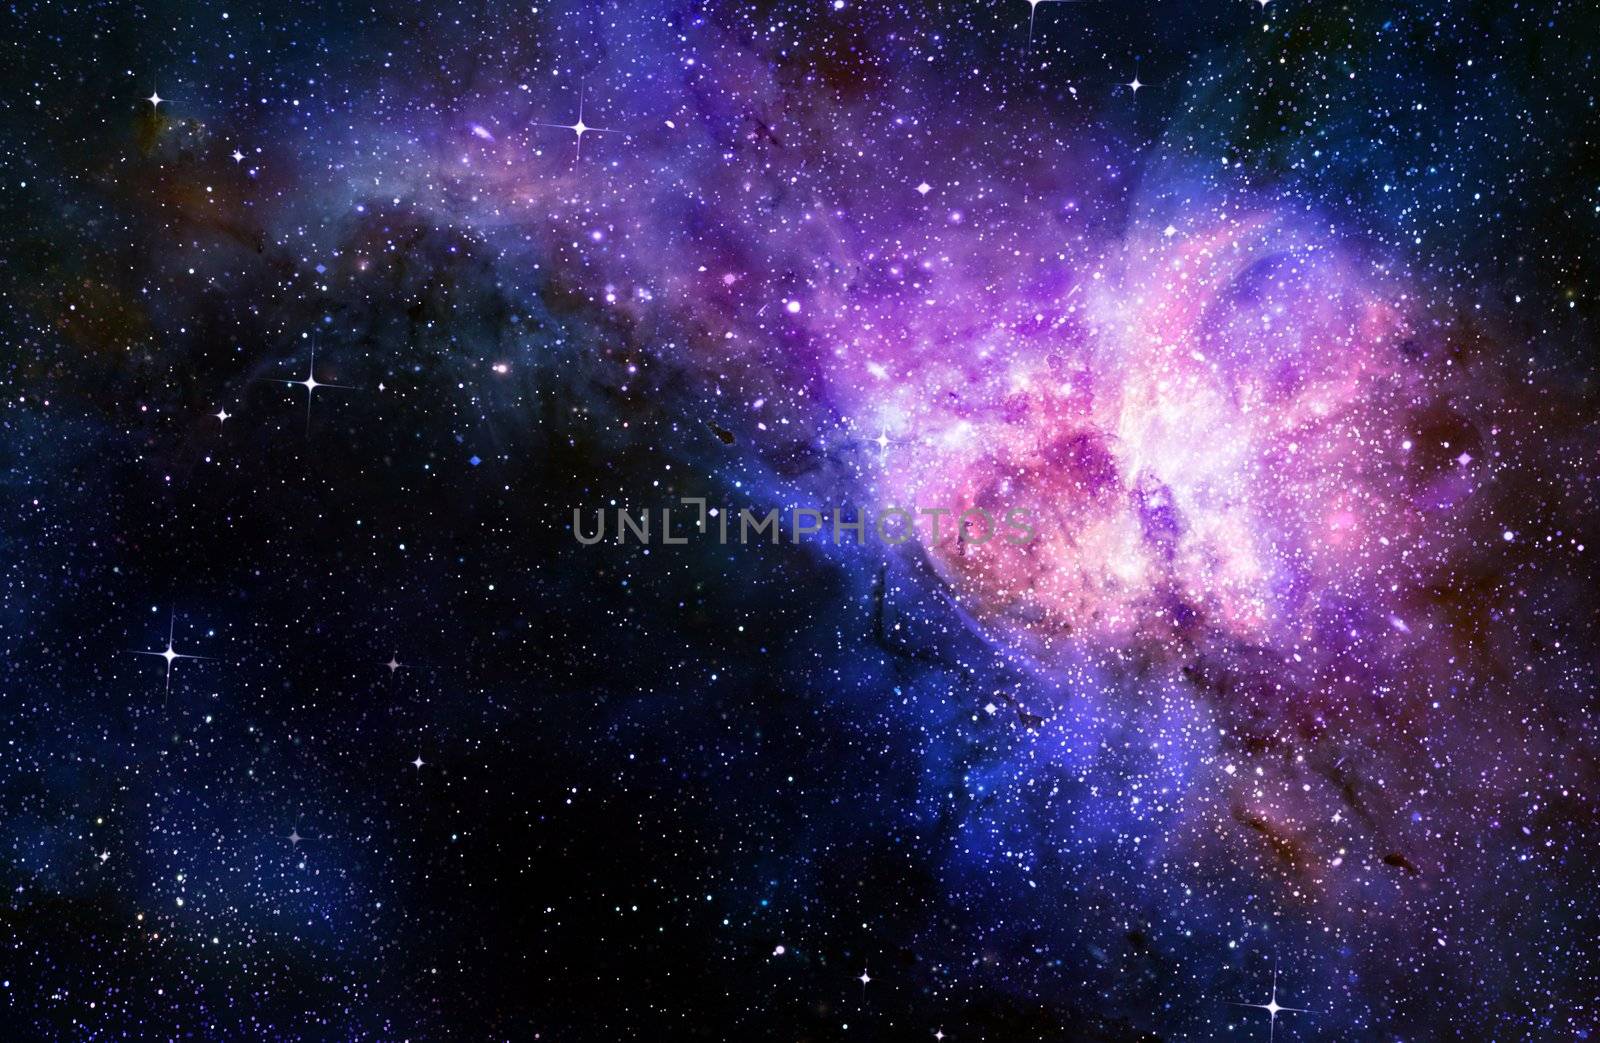 deep outer space background with stars and nebula